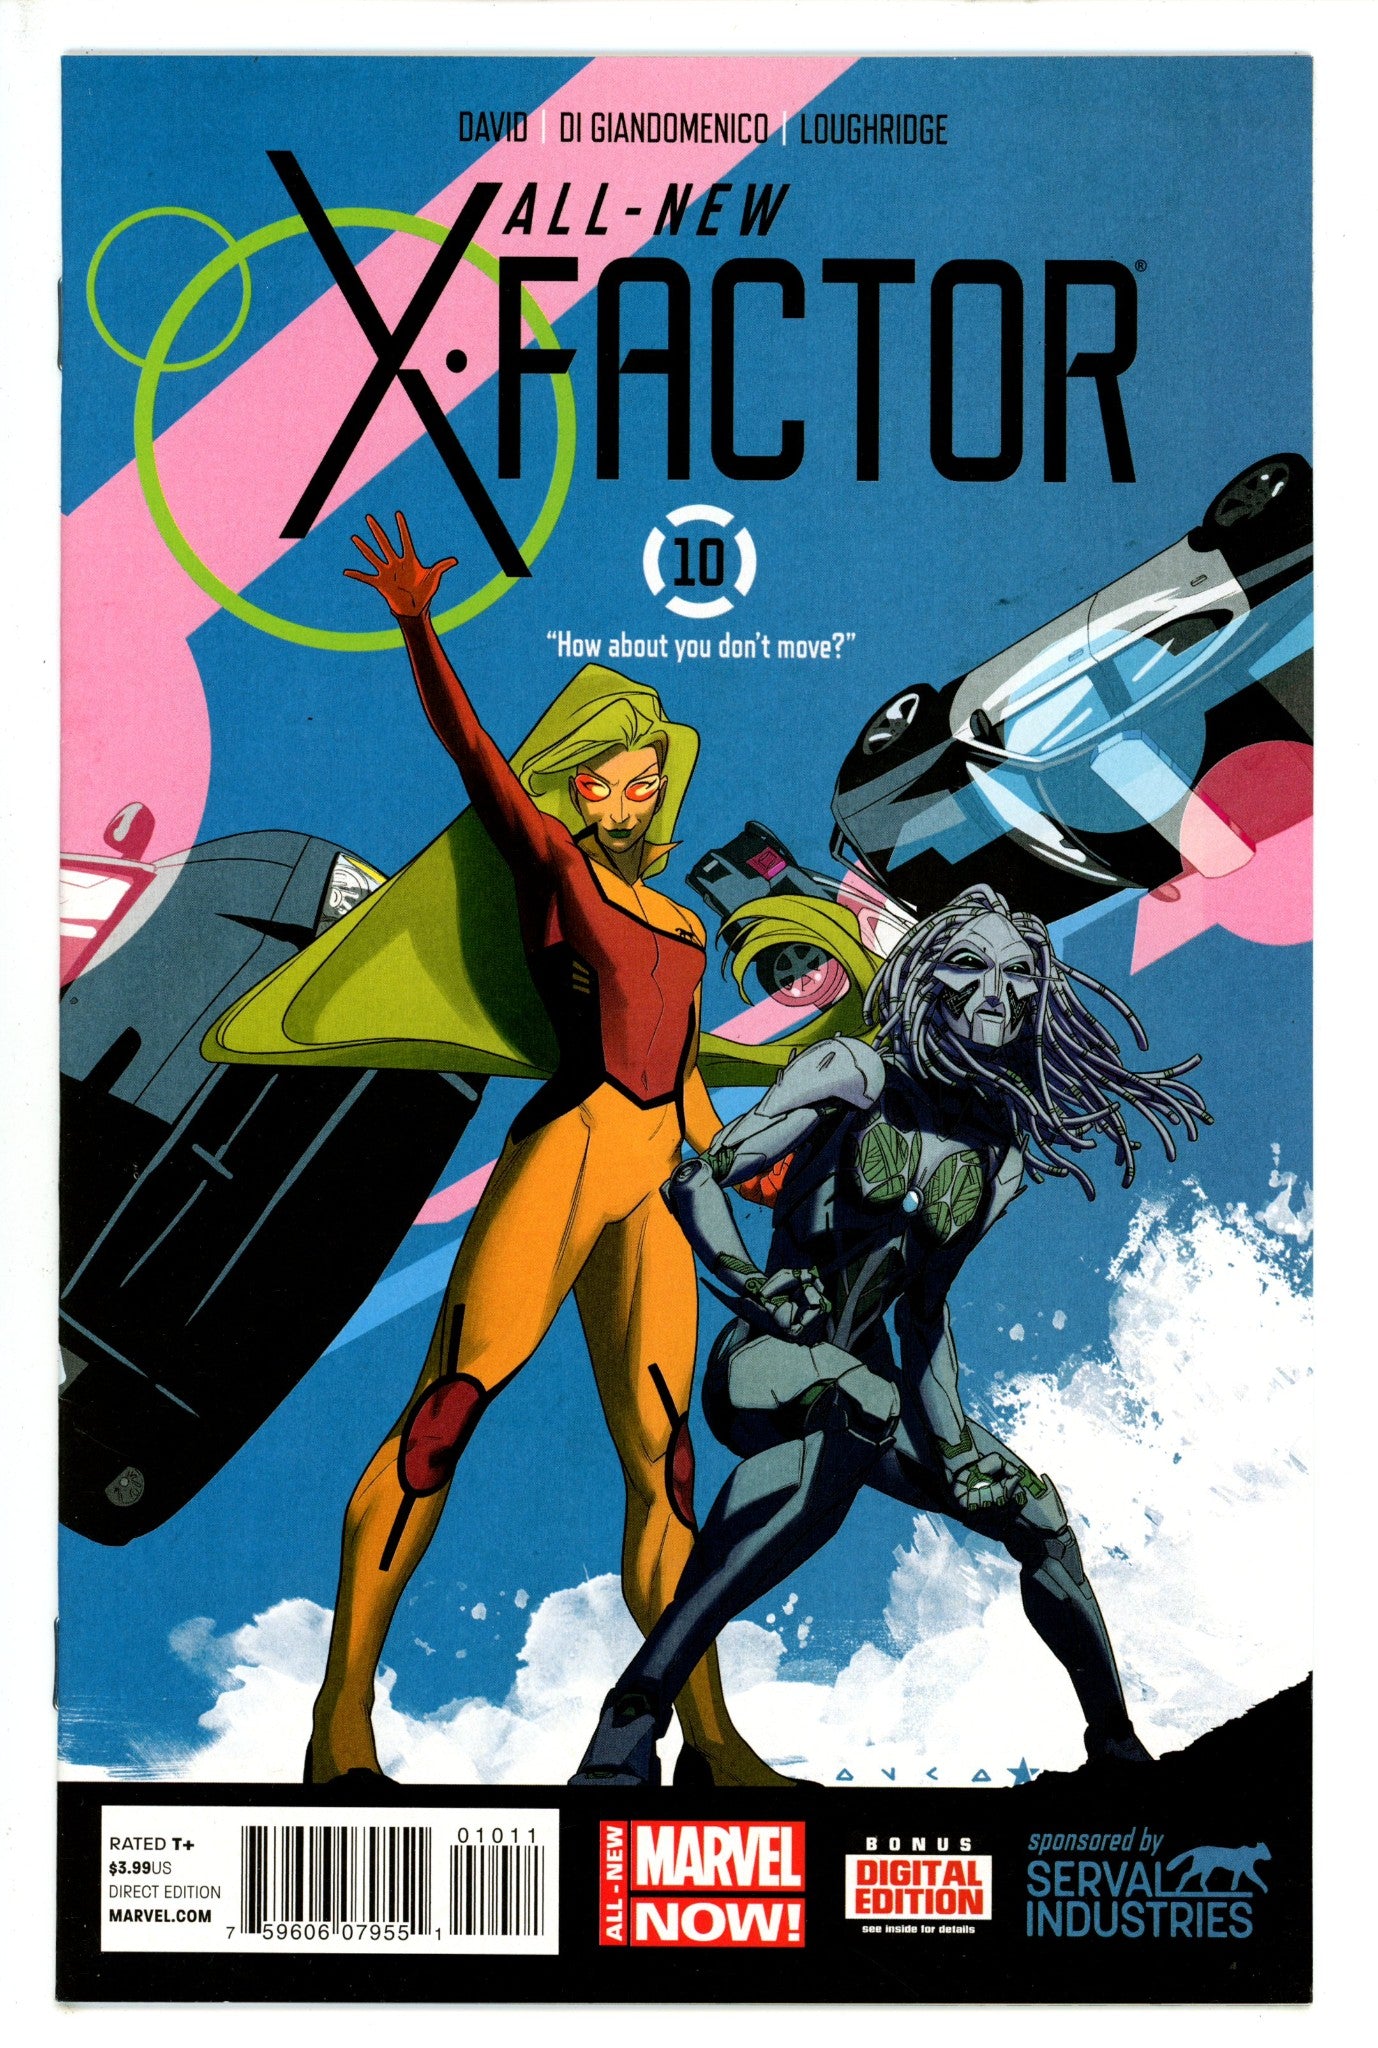 All-New X-Factor 10 (2014)